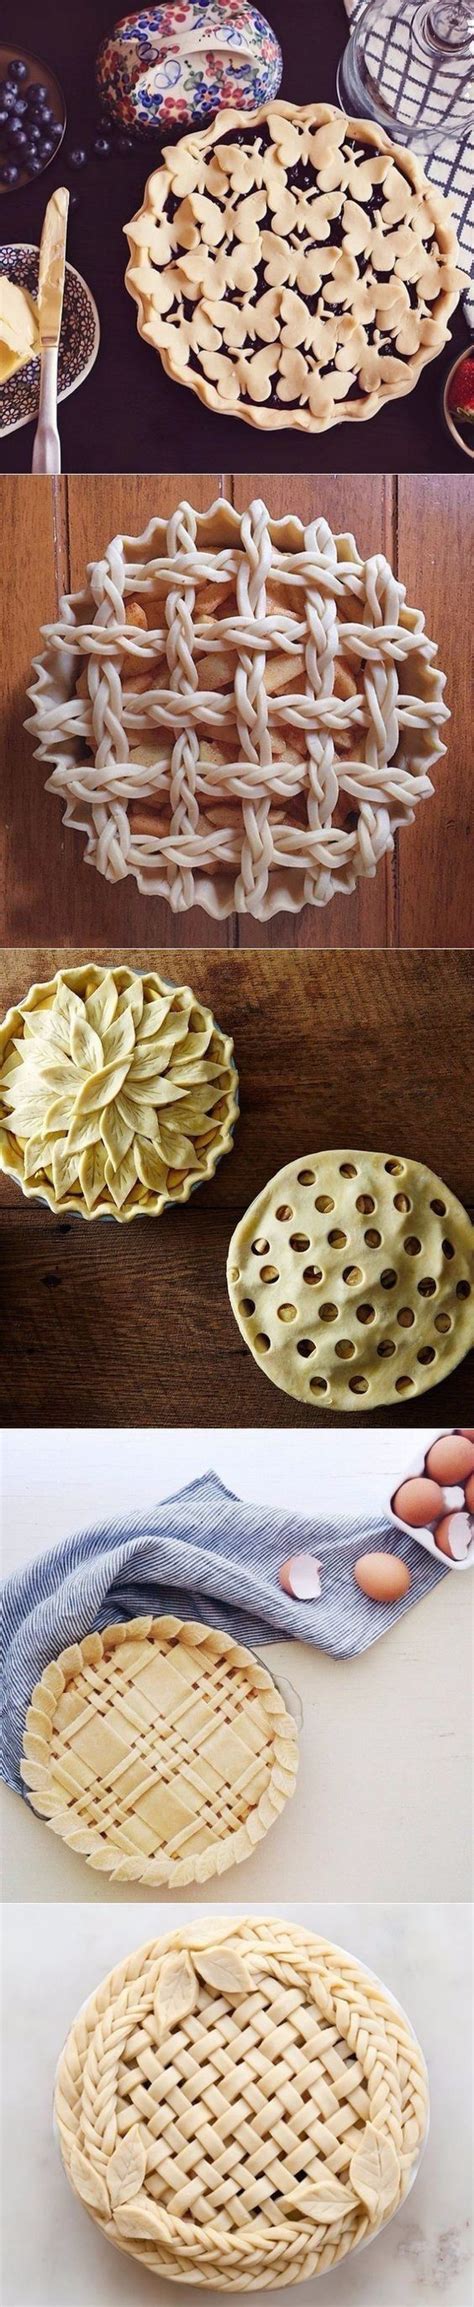 Make sure whatever fat you're using (butter, shortening, etc.) is cold. Ideas para decorar pay | https://lomejordelaweb.es ...